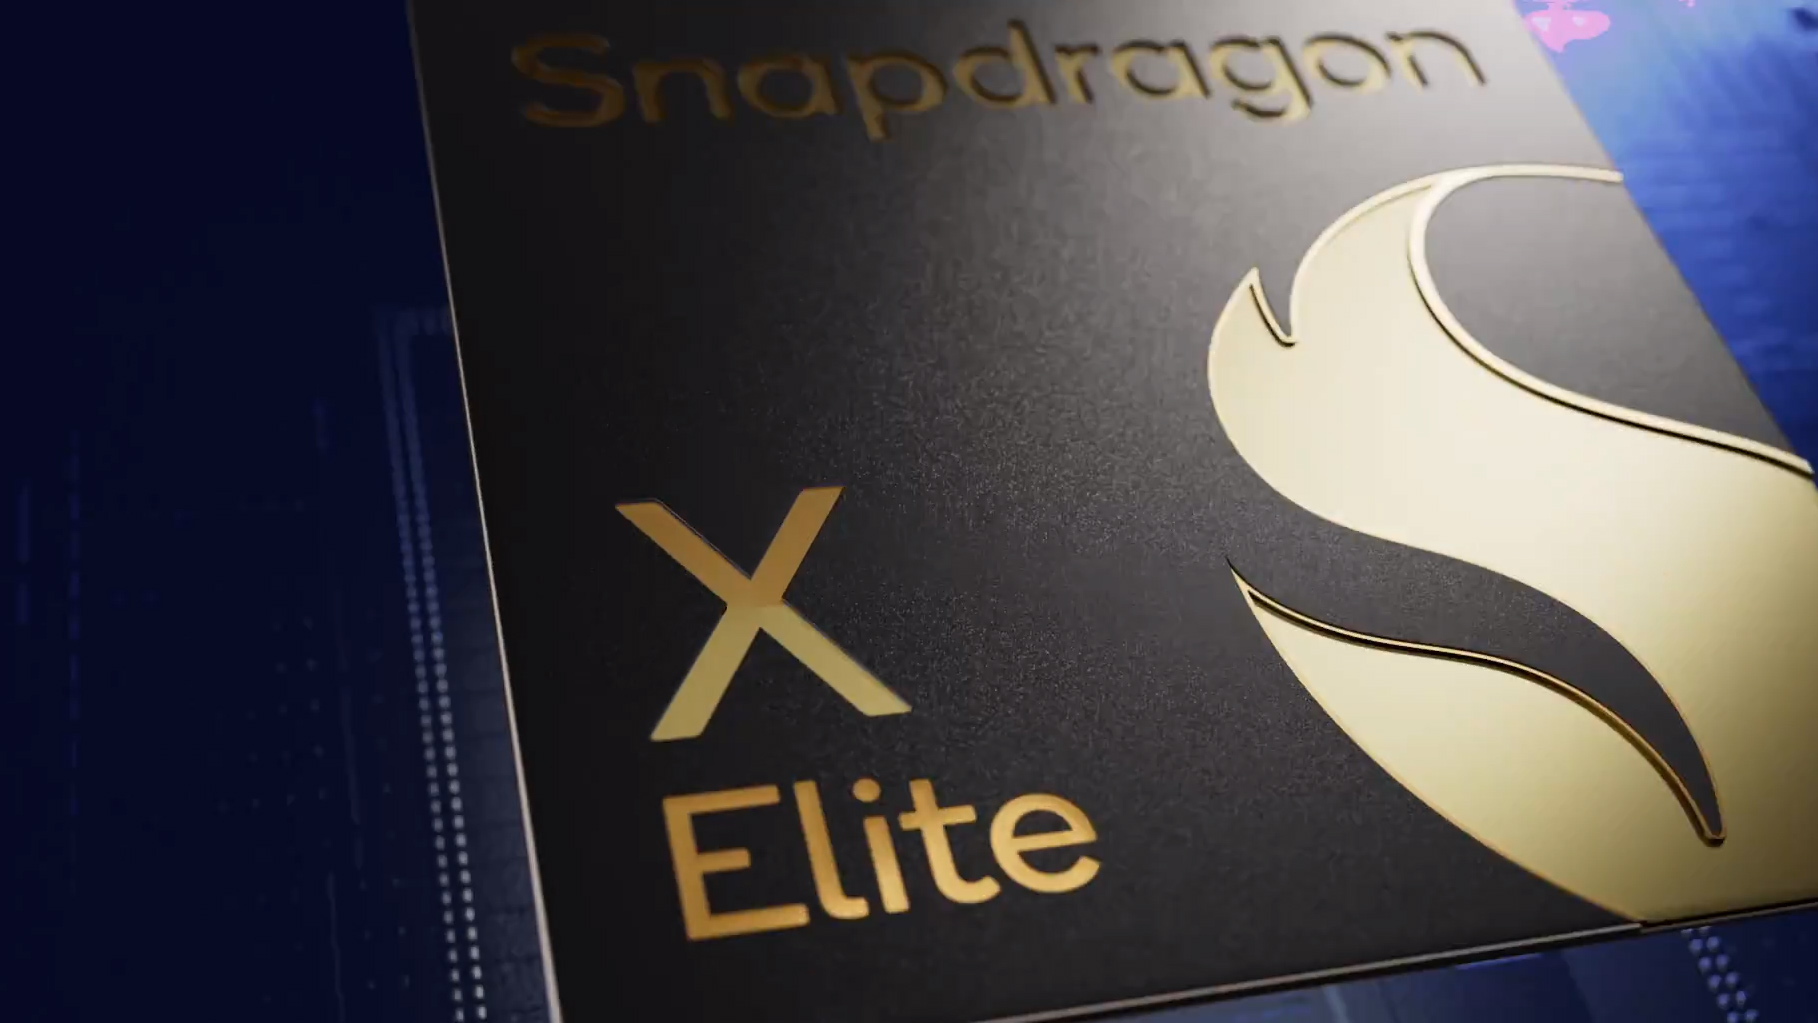 Qualcomm claims that the new Snapdragon X Elite is 21% faster than the Apple M3 processor